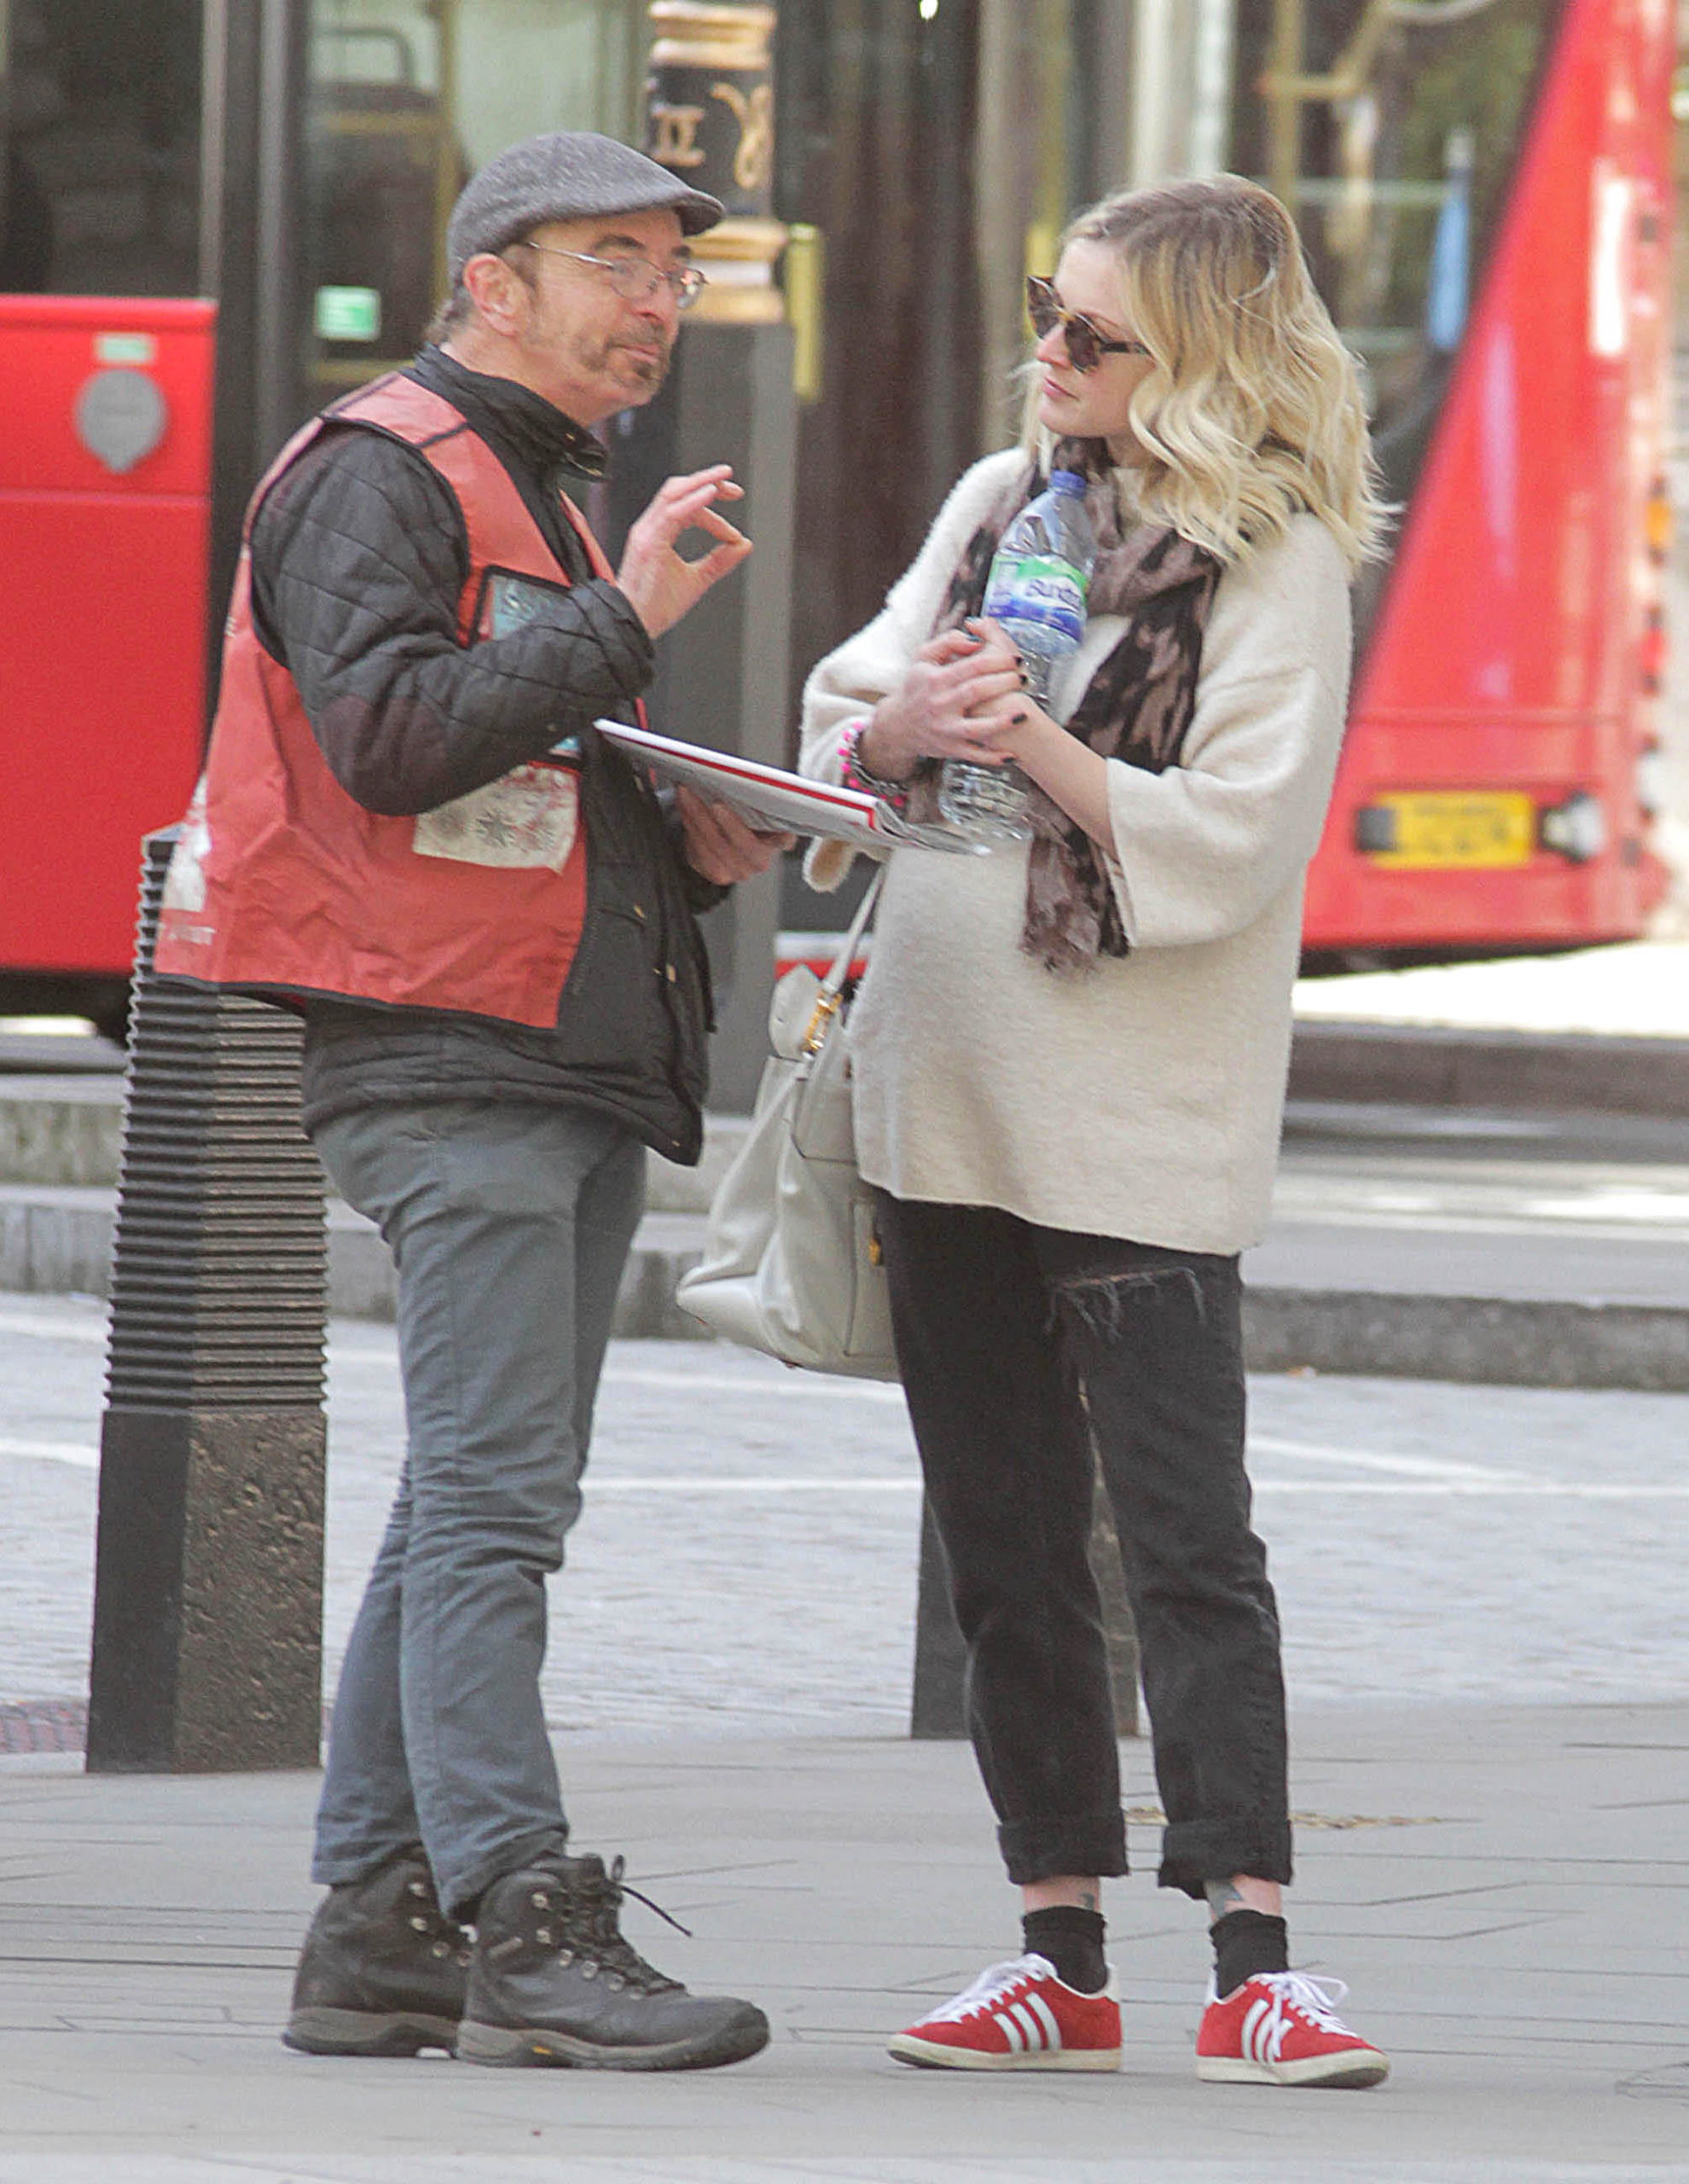 Fearne Cotton chats to a Big Issue seller as she arrives at the BBC Radio 1 studios. Photo: Alamy Stock Photo